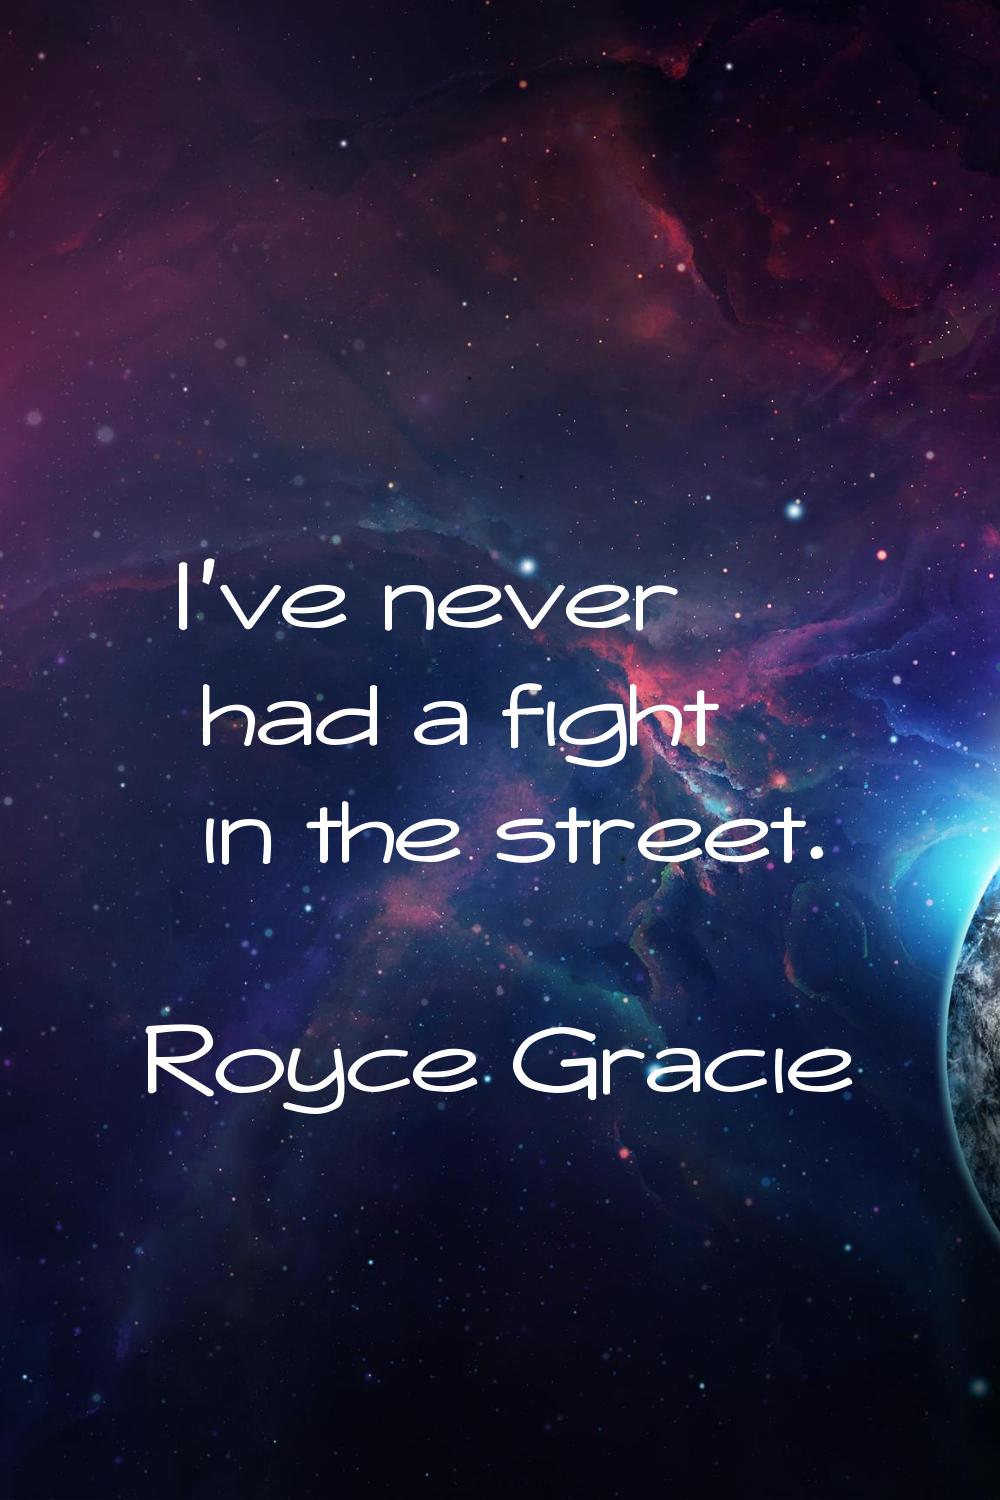 I've never had a fight in the street.